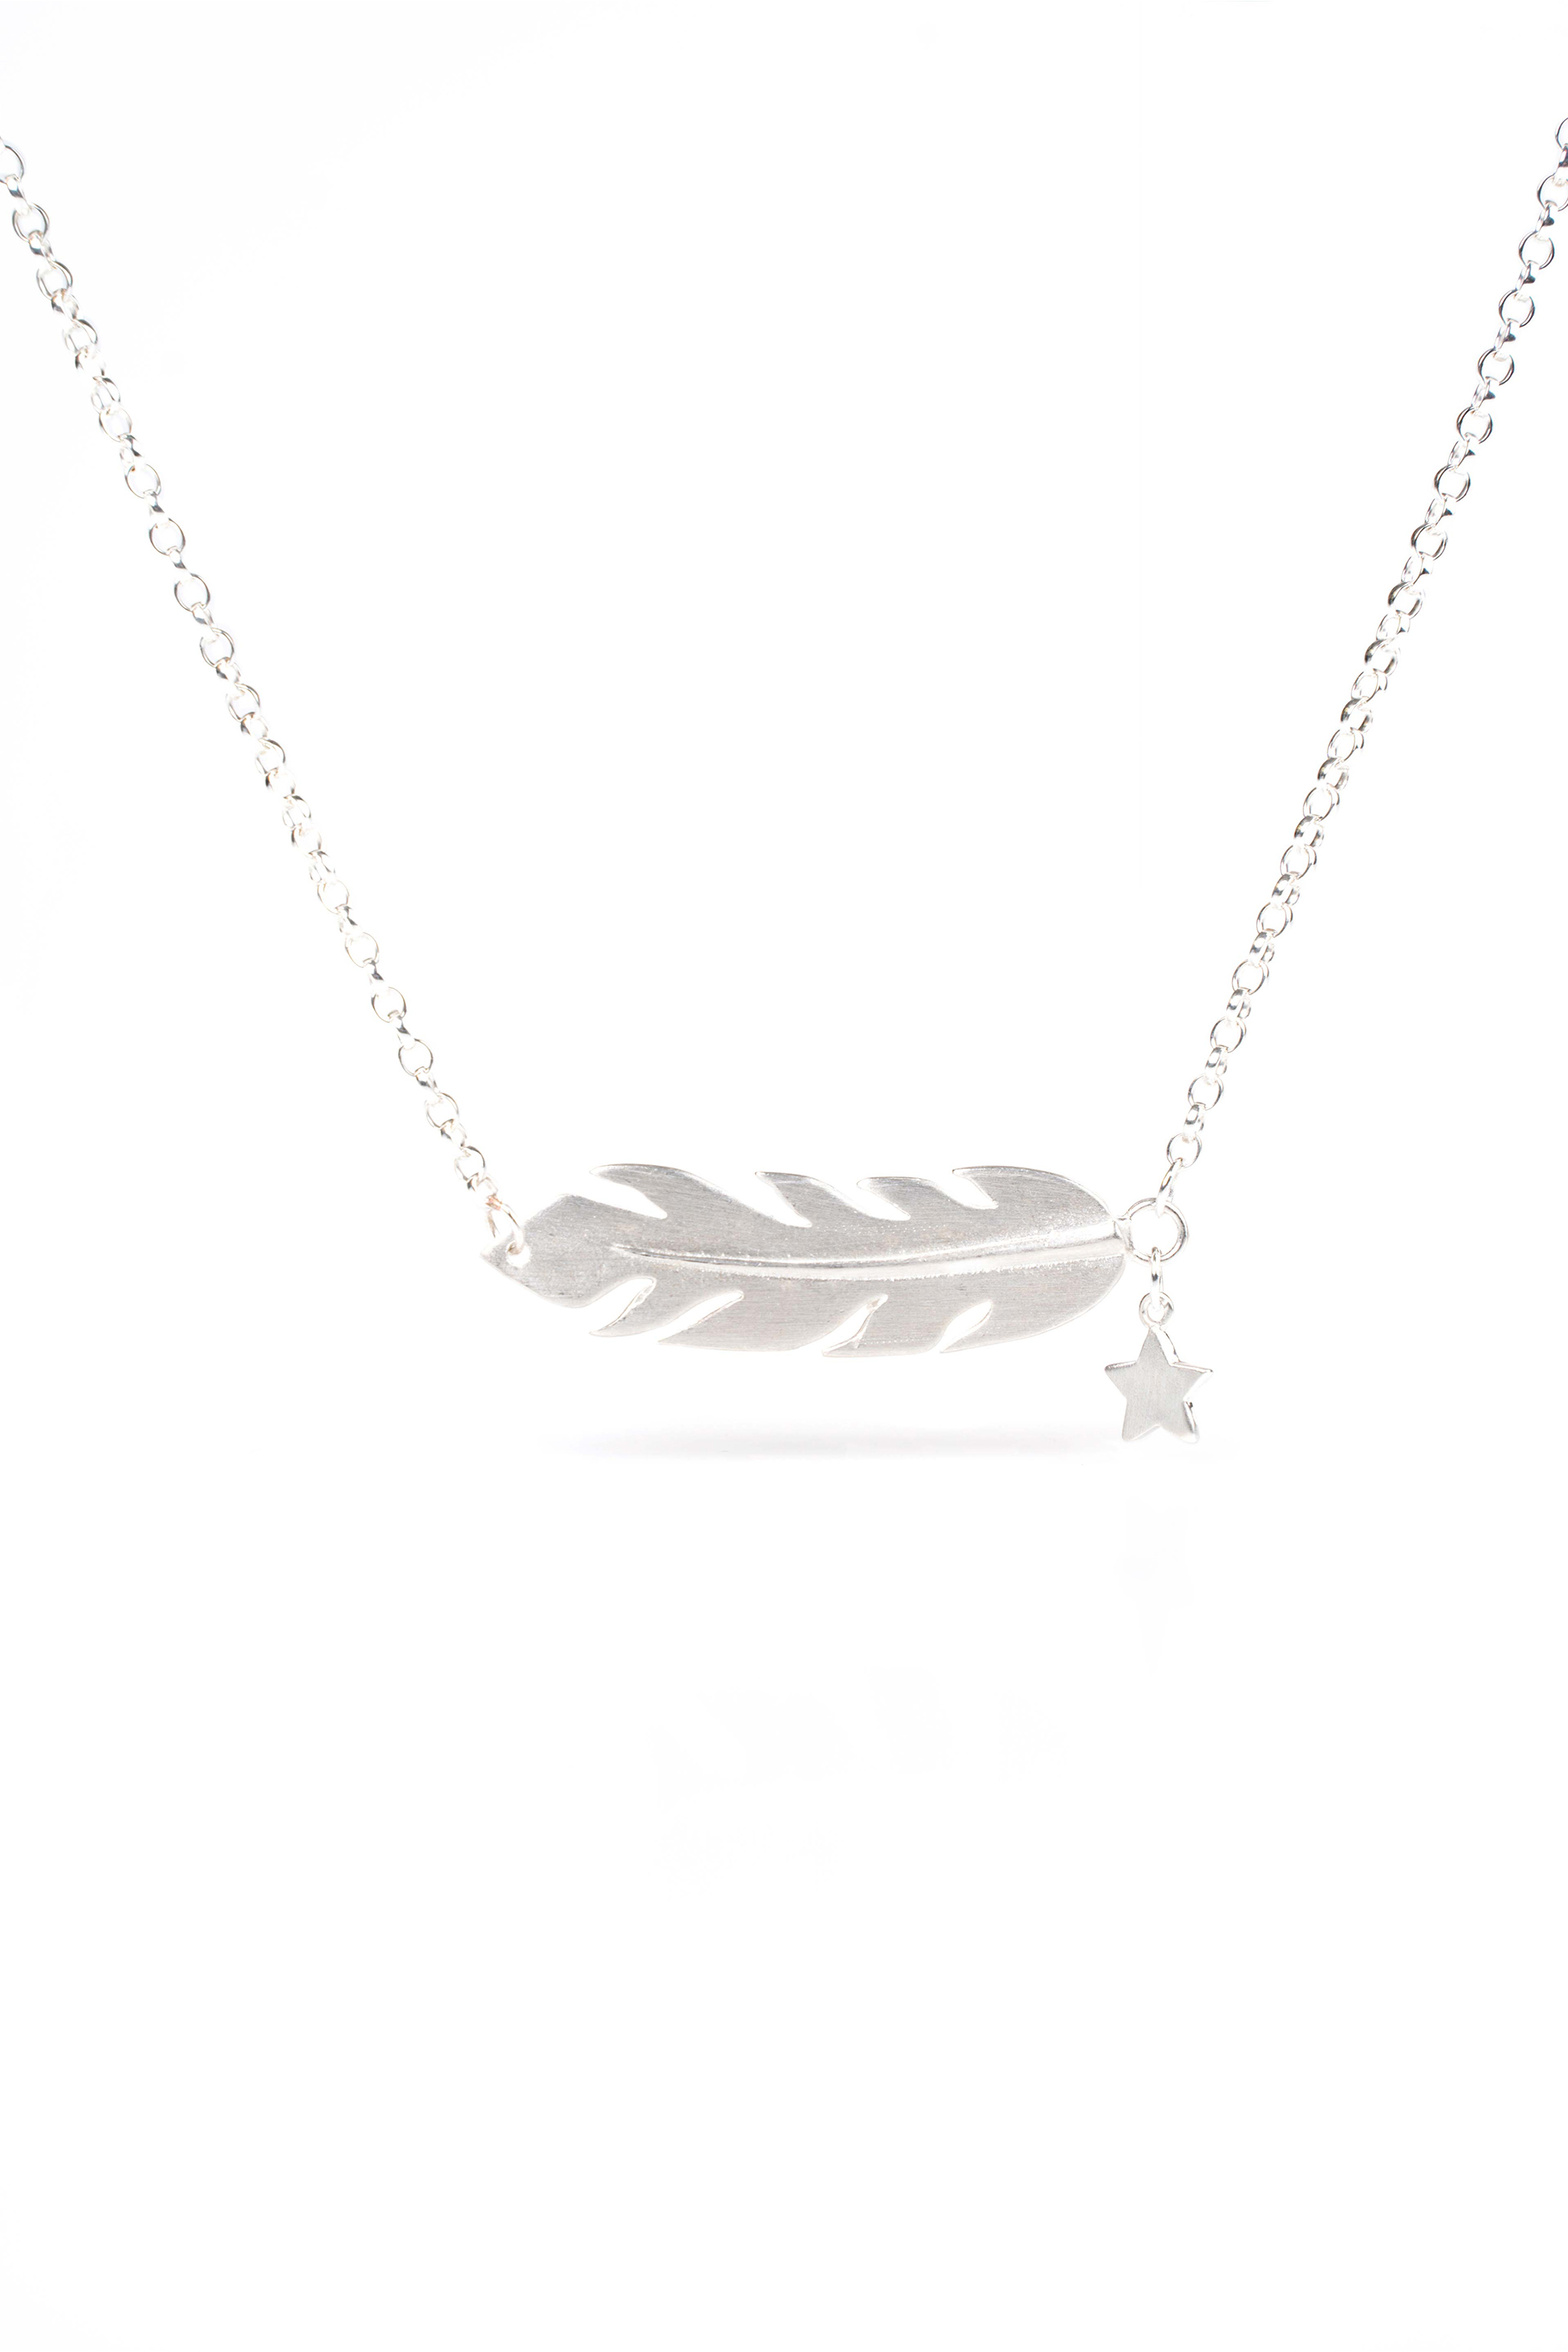 cb298_feathernecklace_silver_front_resized.jpg